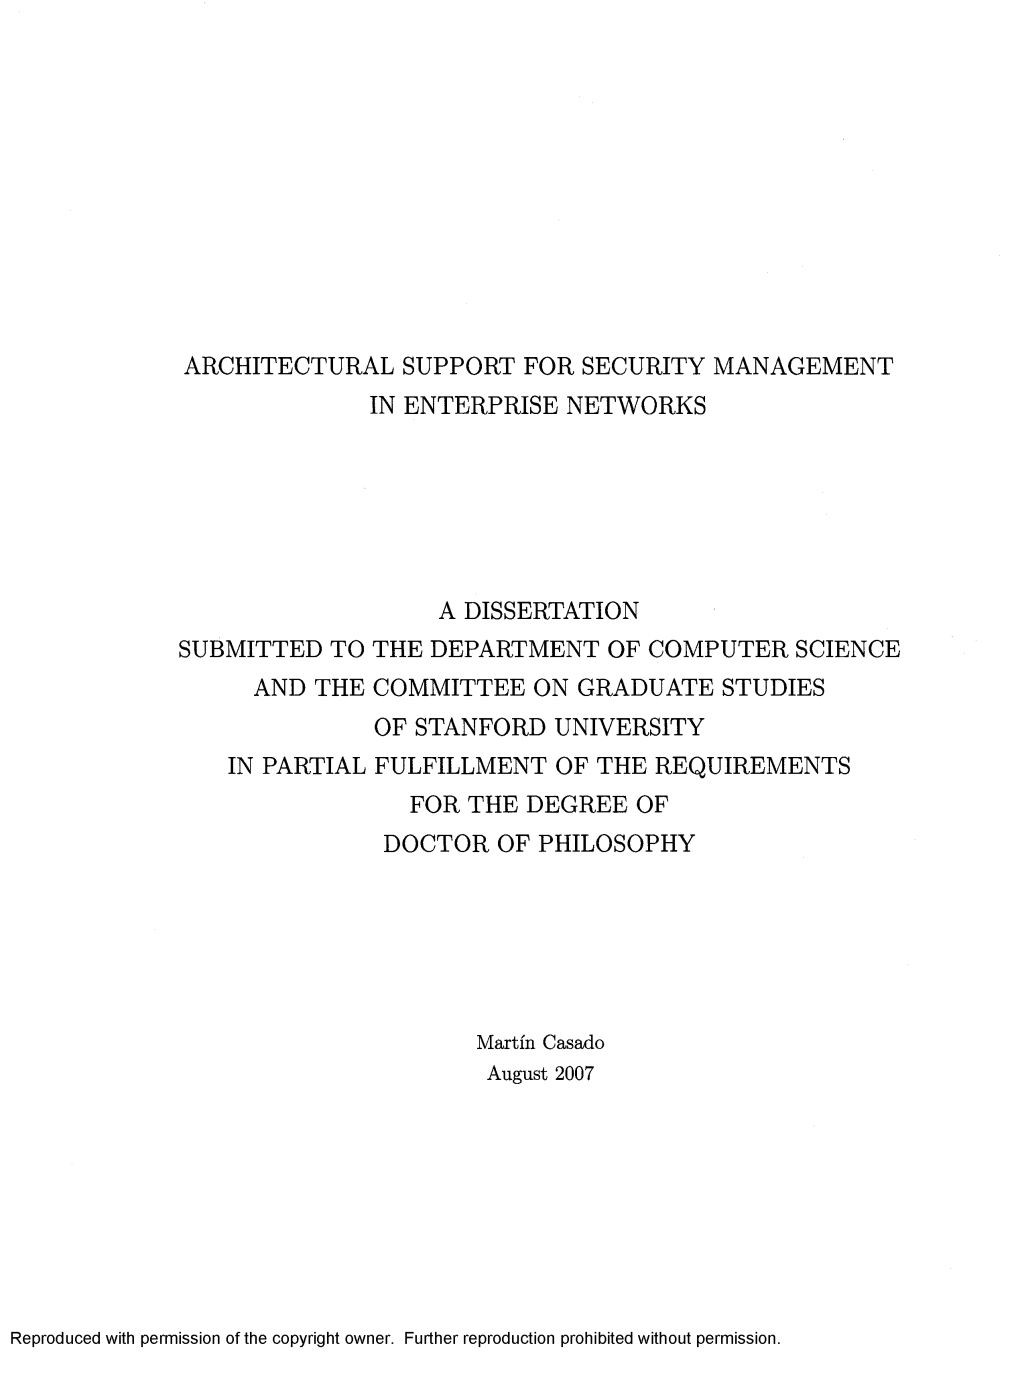 Architectural Support for Security Management in Enterprise Networks